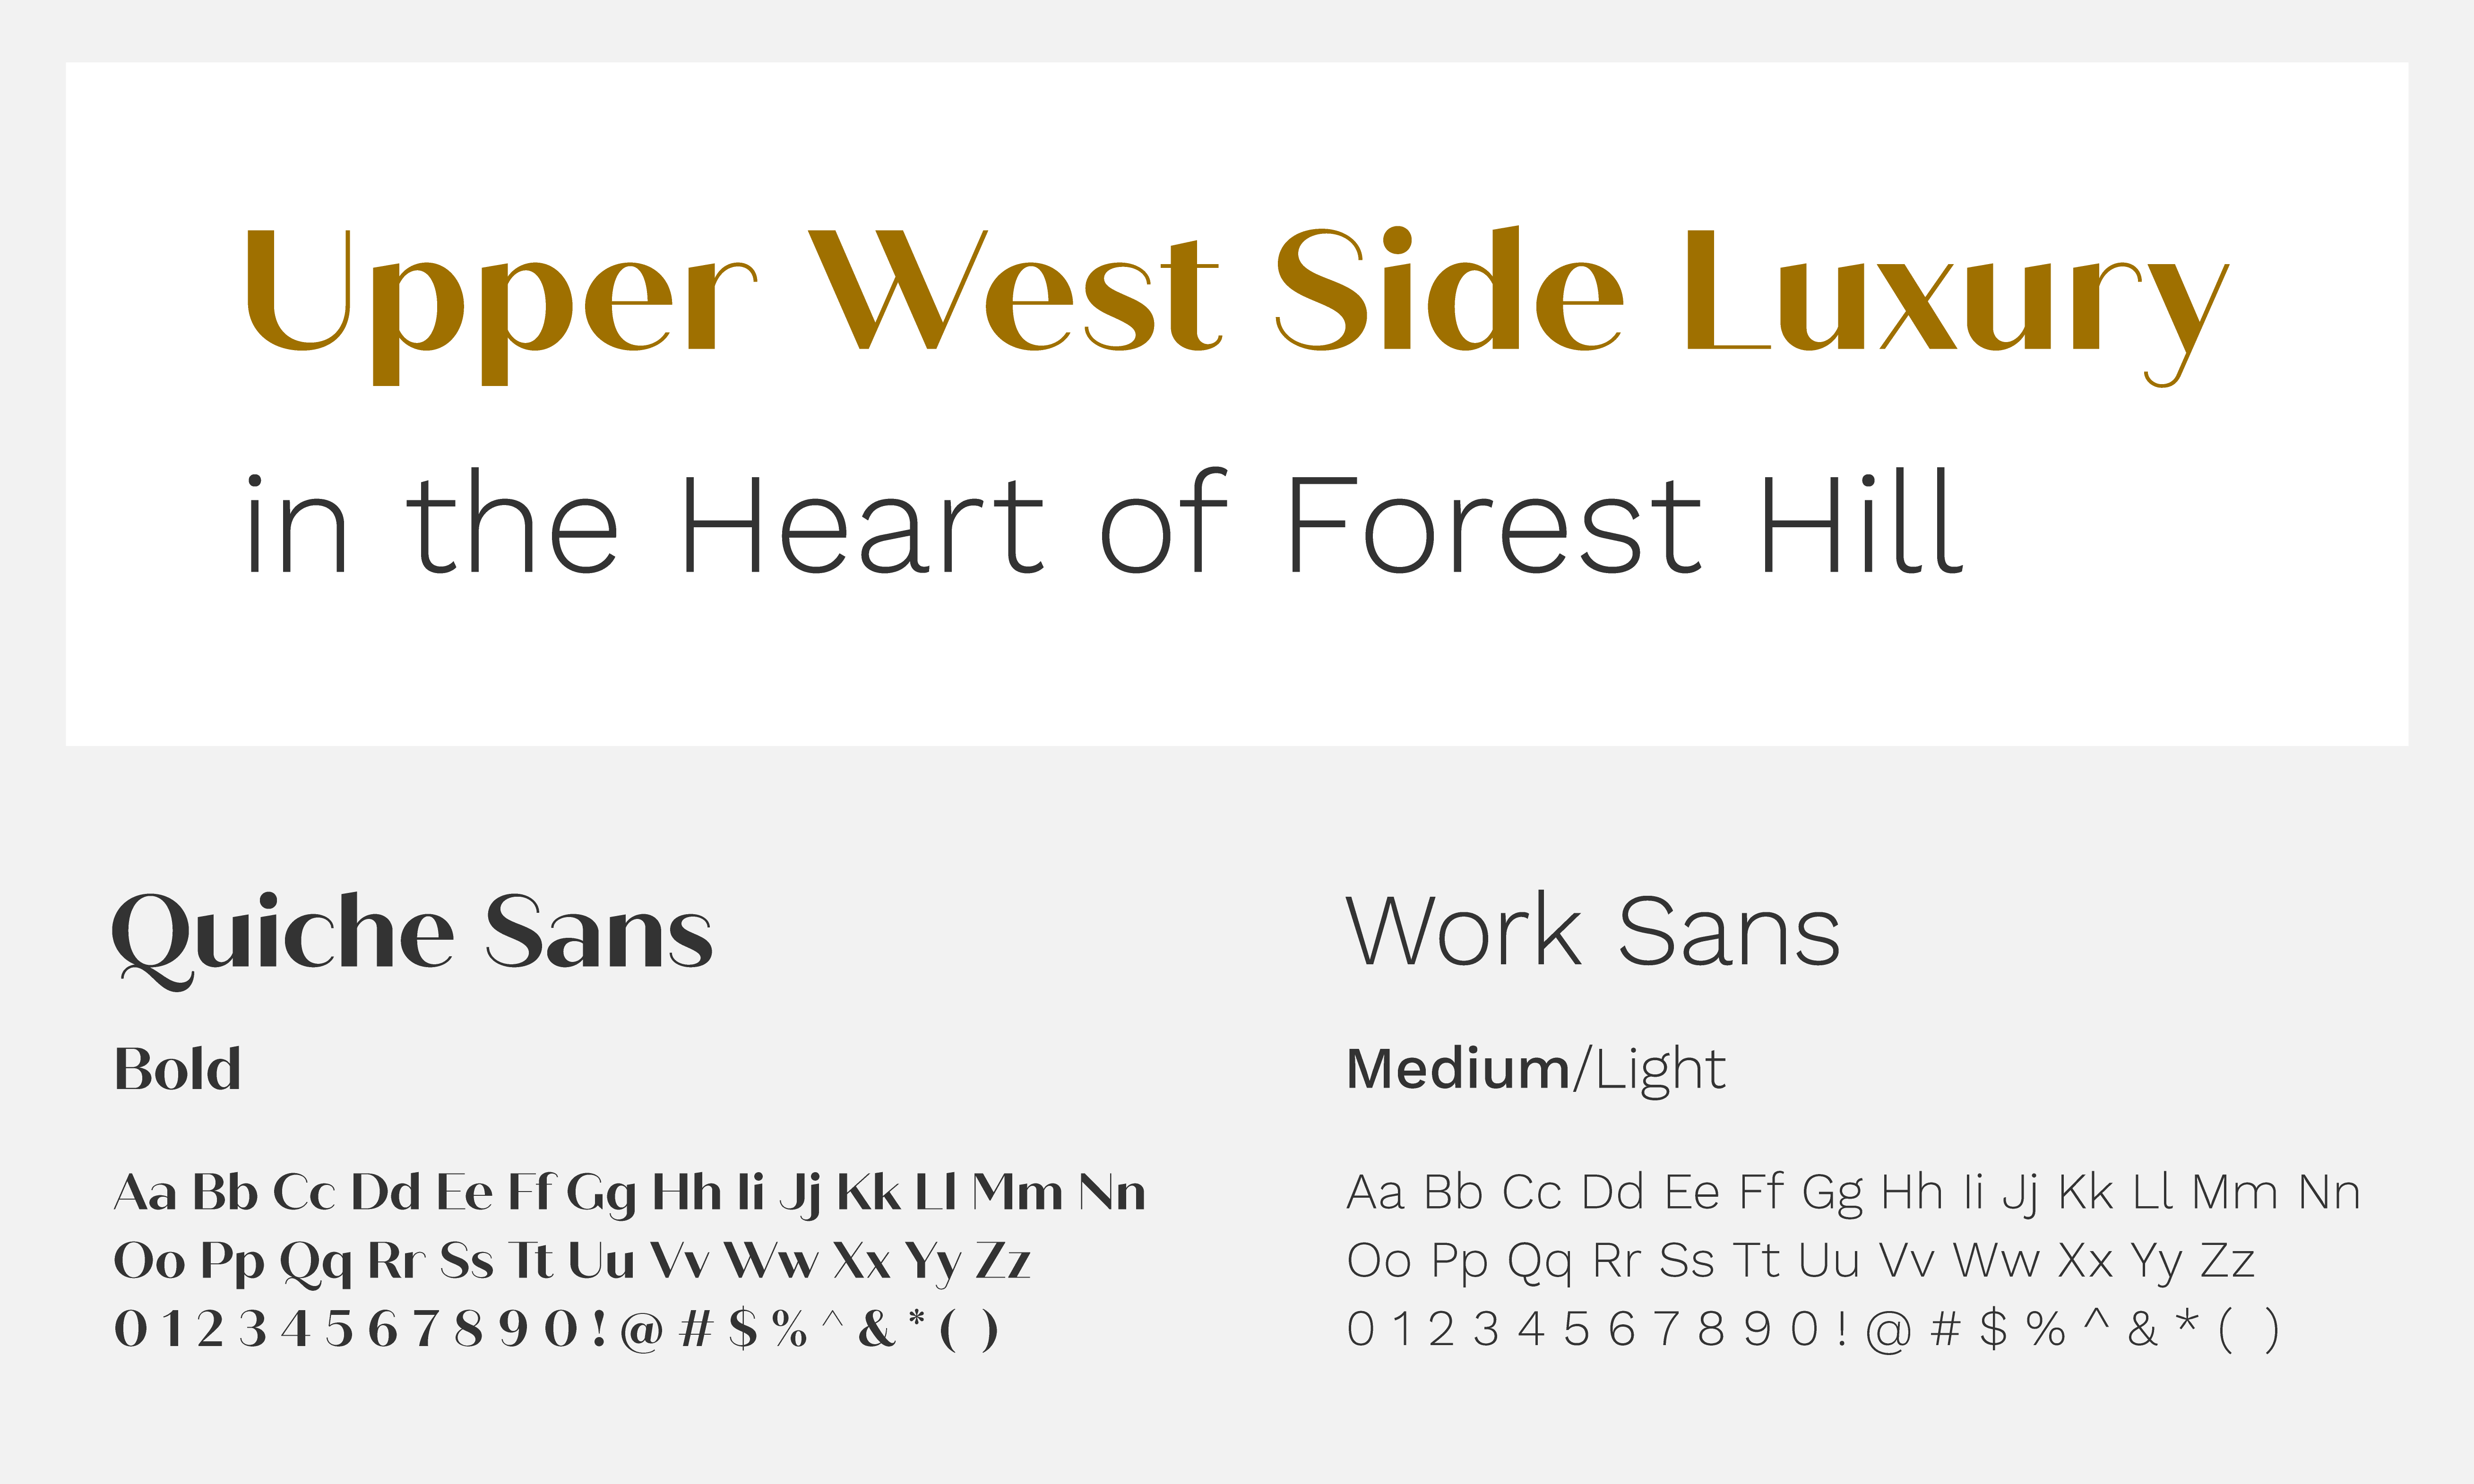 Text and Typography - HomeSmart font choices